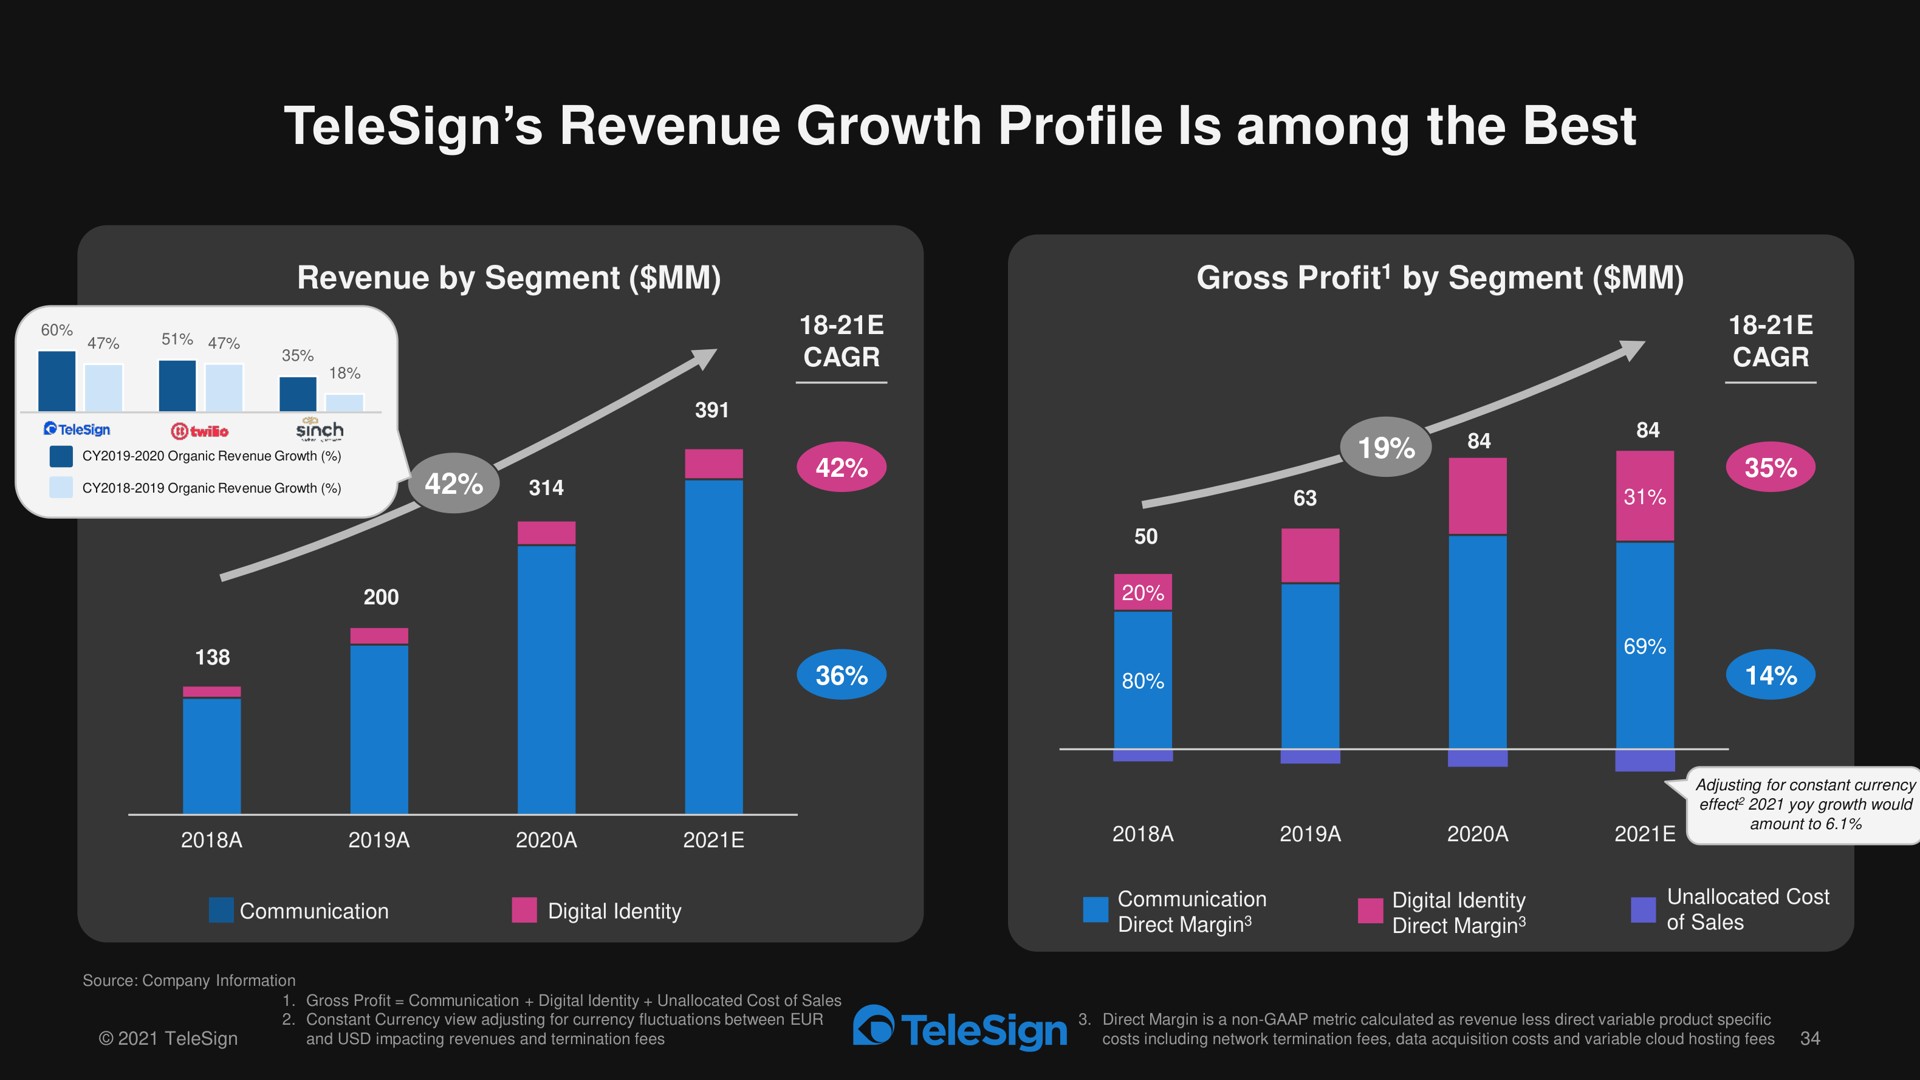 revenue growth profile is among the best | TeleSign